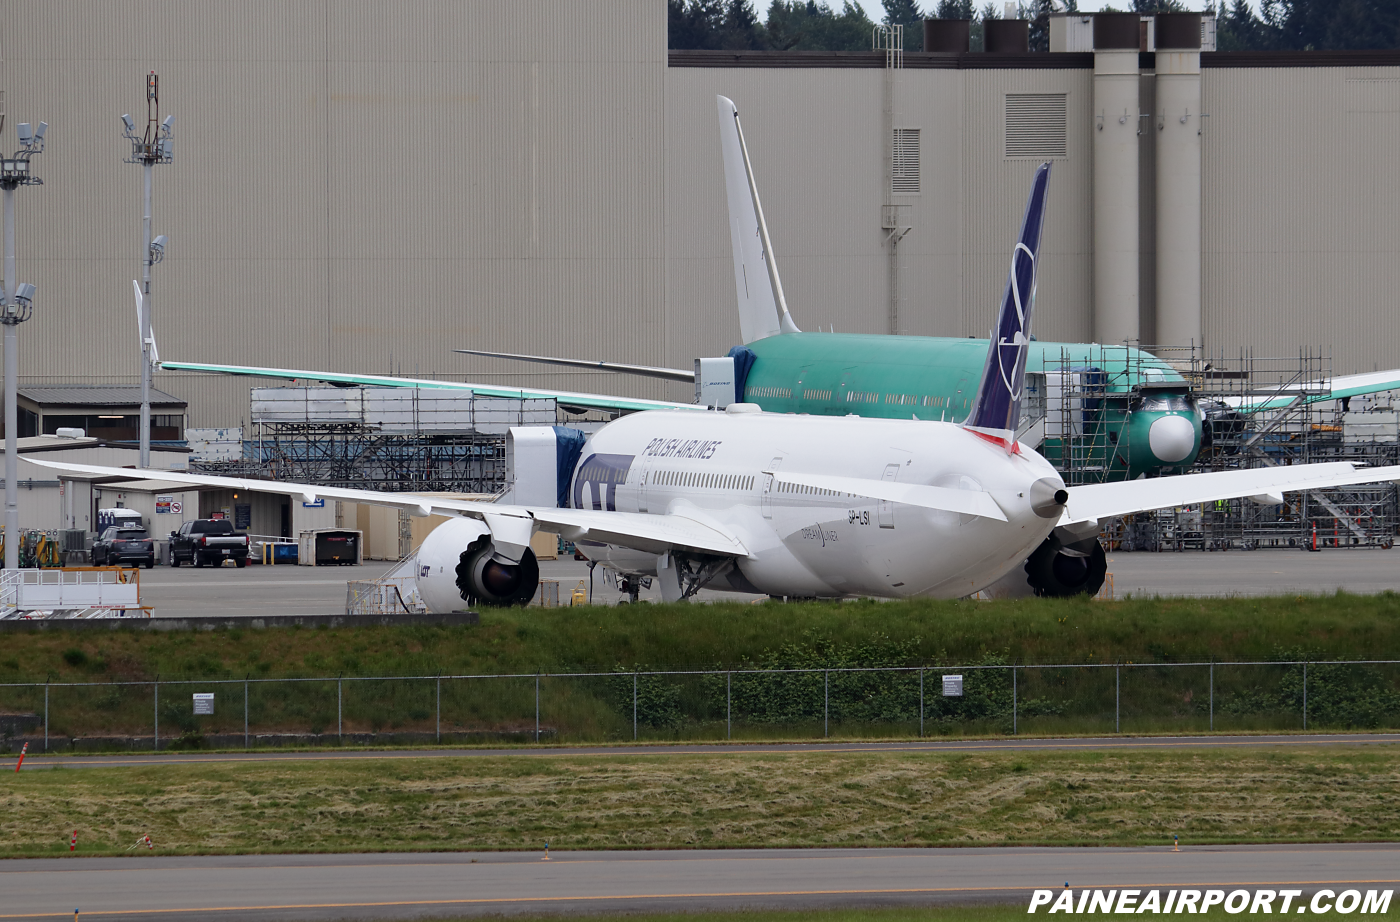 LOT Polish Airlines 787 SP-LSI at KPAE Paine Field